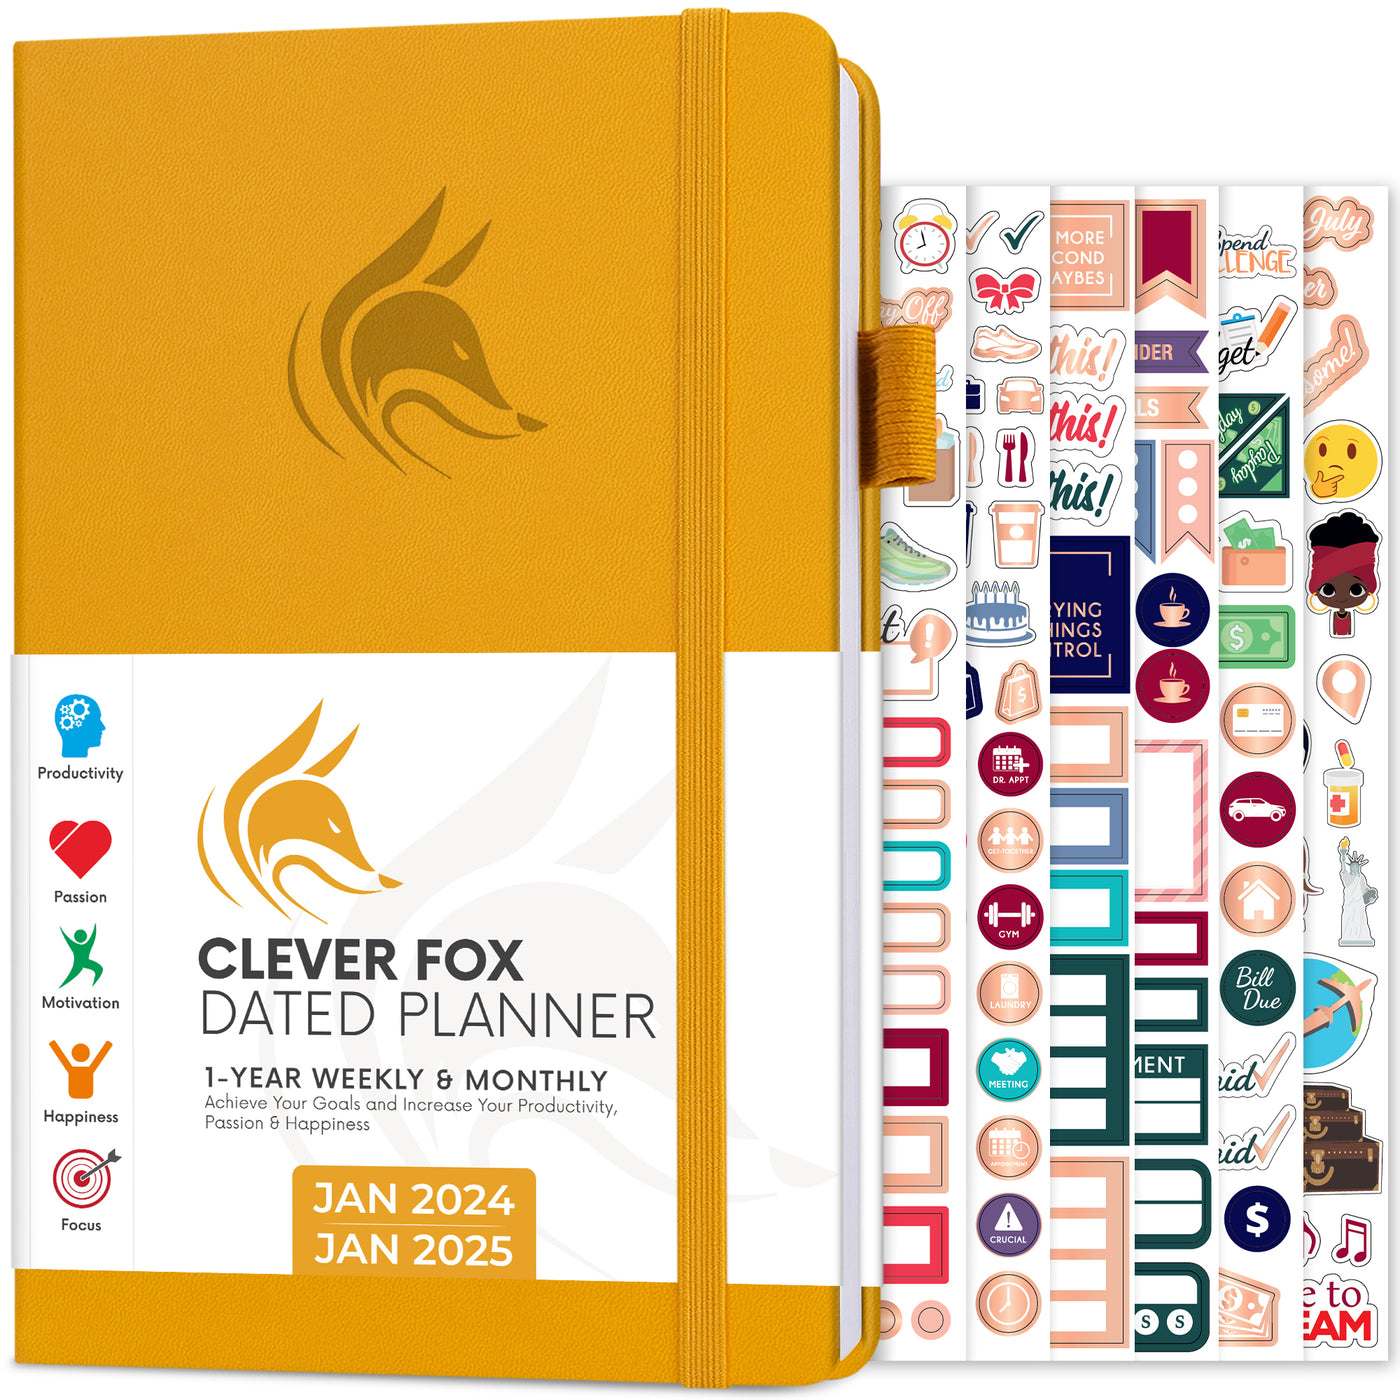 Compare Clever Fox and Panda Planners - Simple Home Gatherings